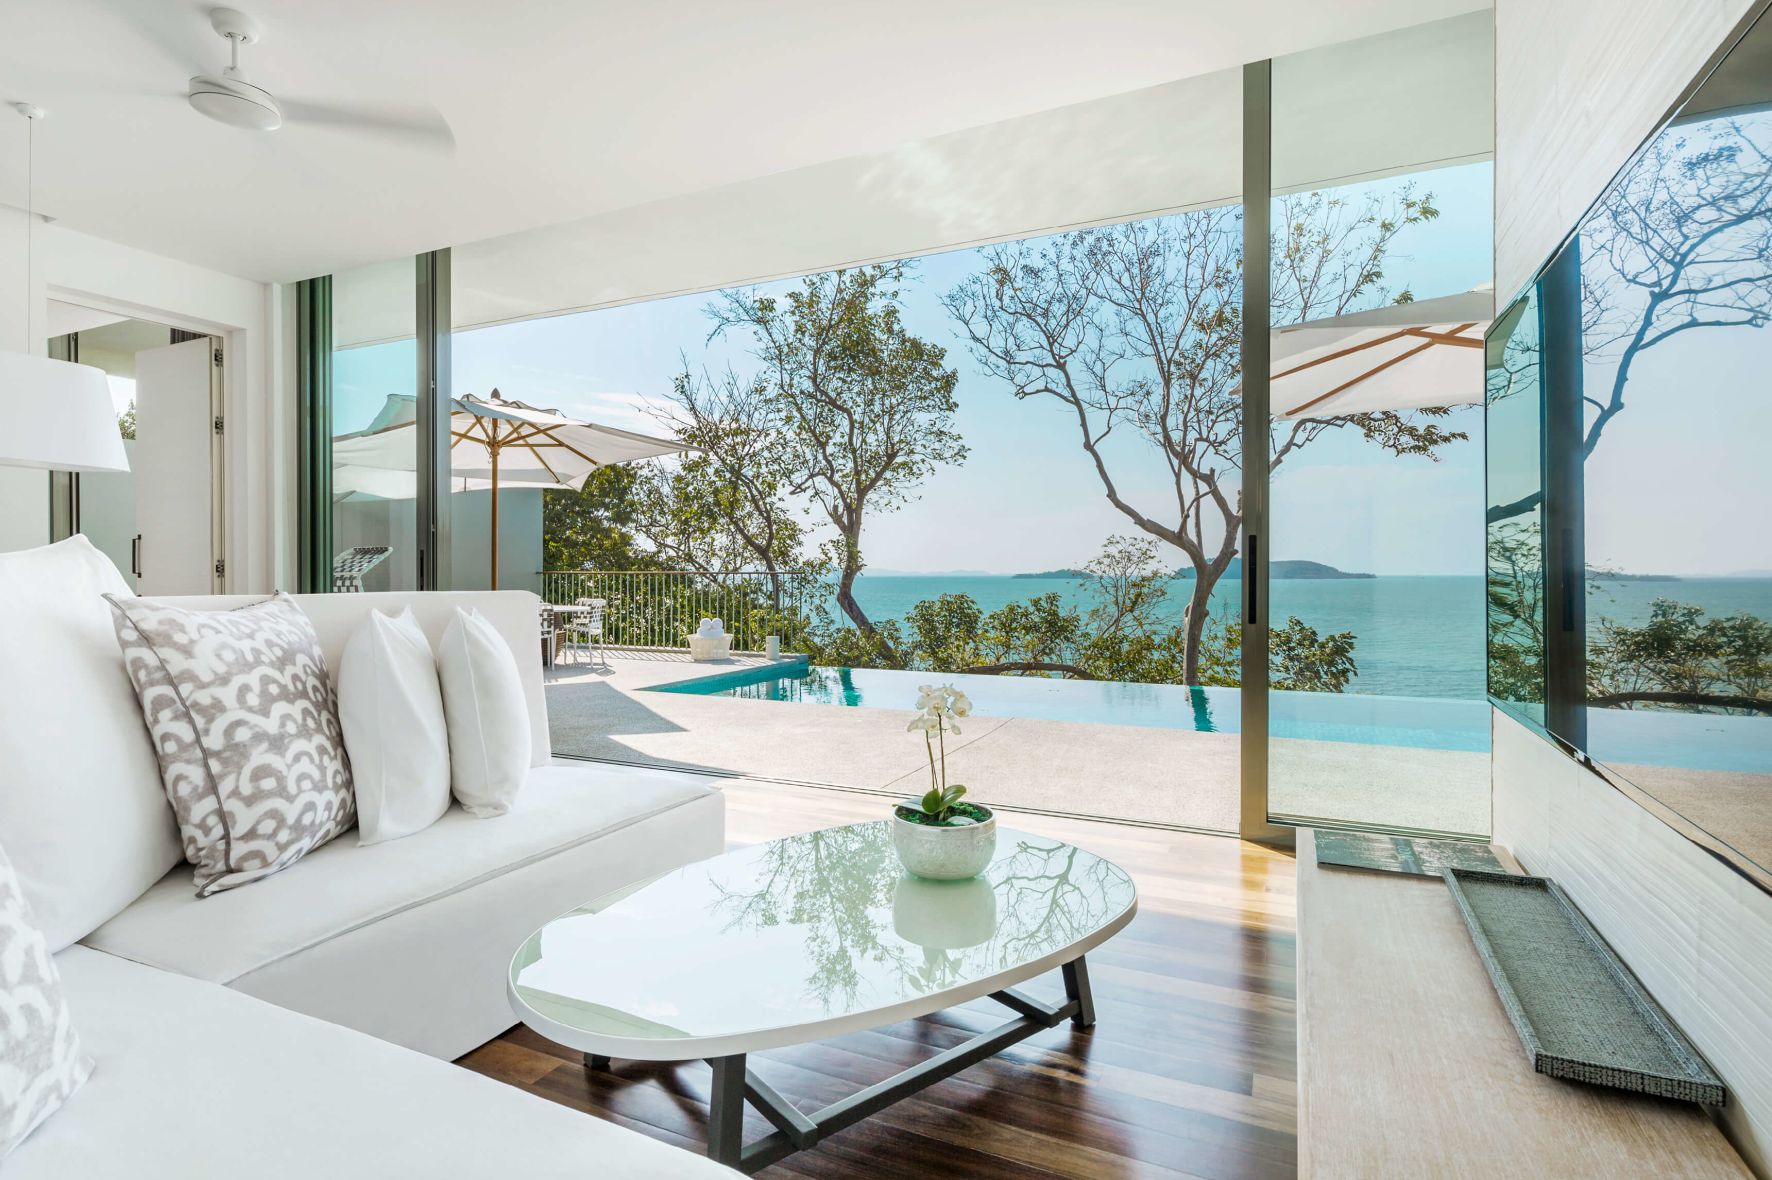 A Room With A Pool And A Large Window With Trees And A Body Of Water In The Background